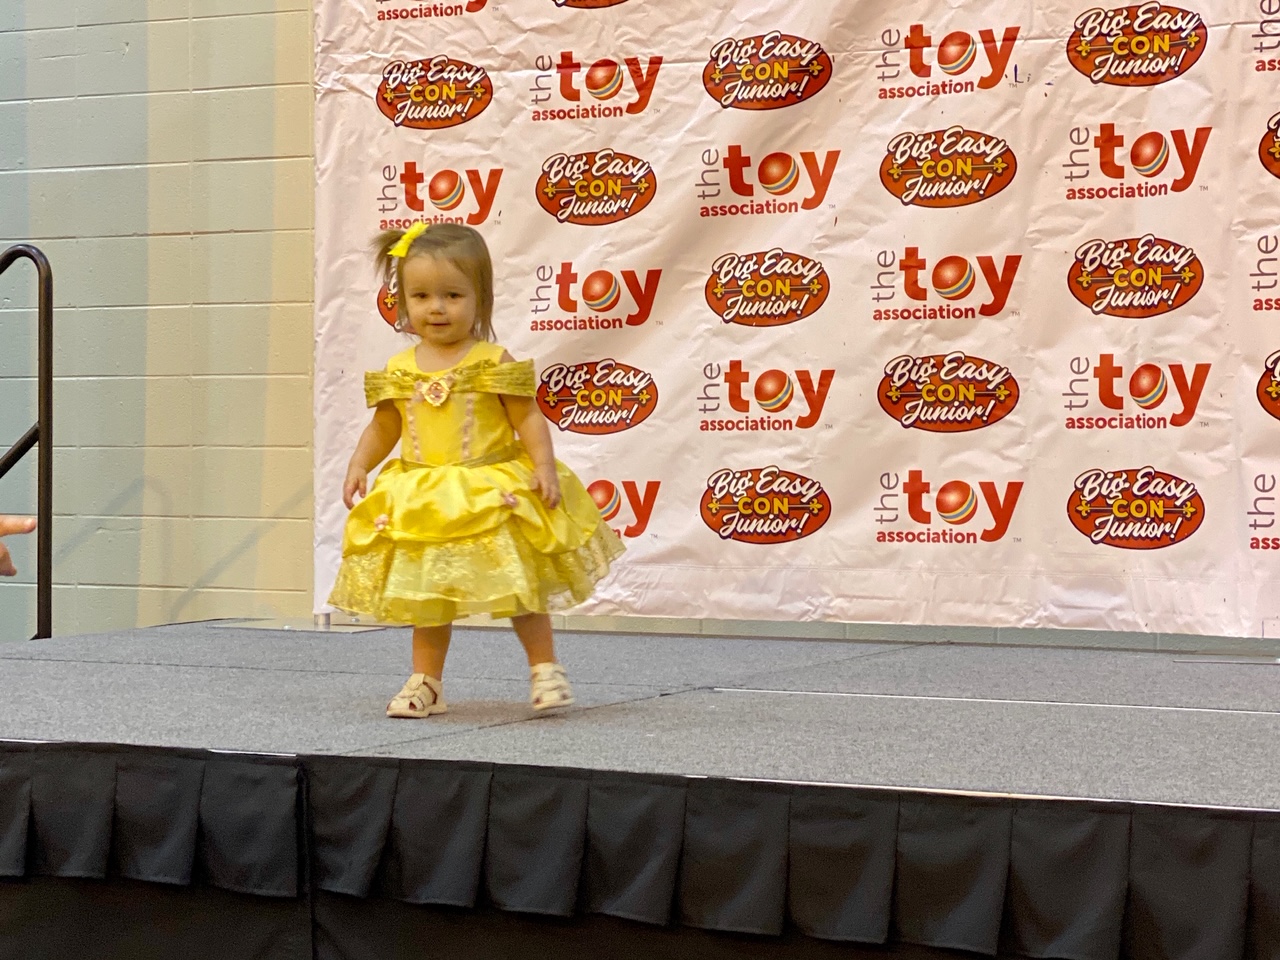 Review of Big Easy Con 2019: Our little one loved the costume parade!